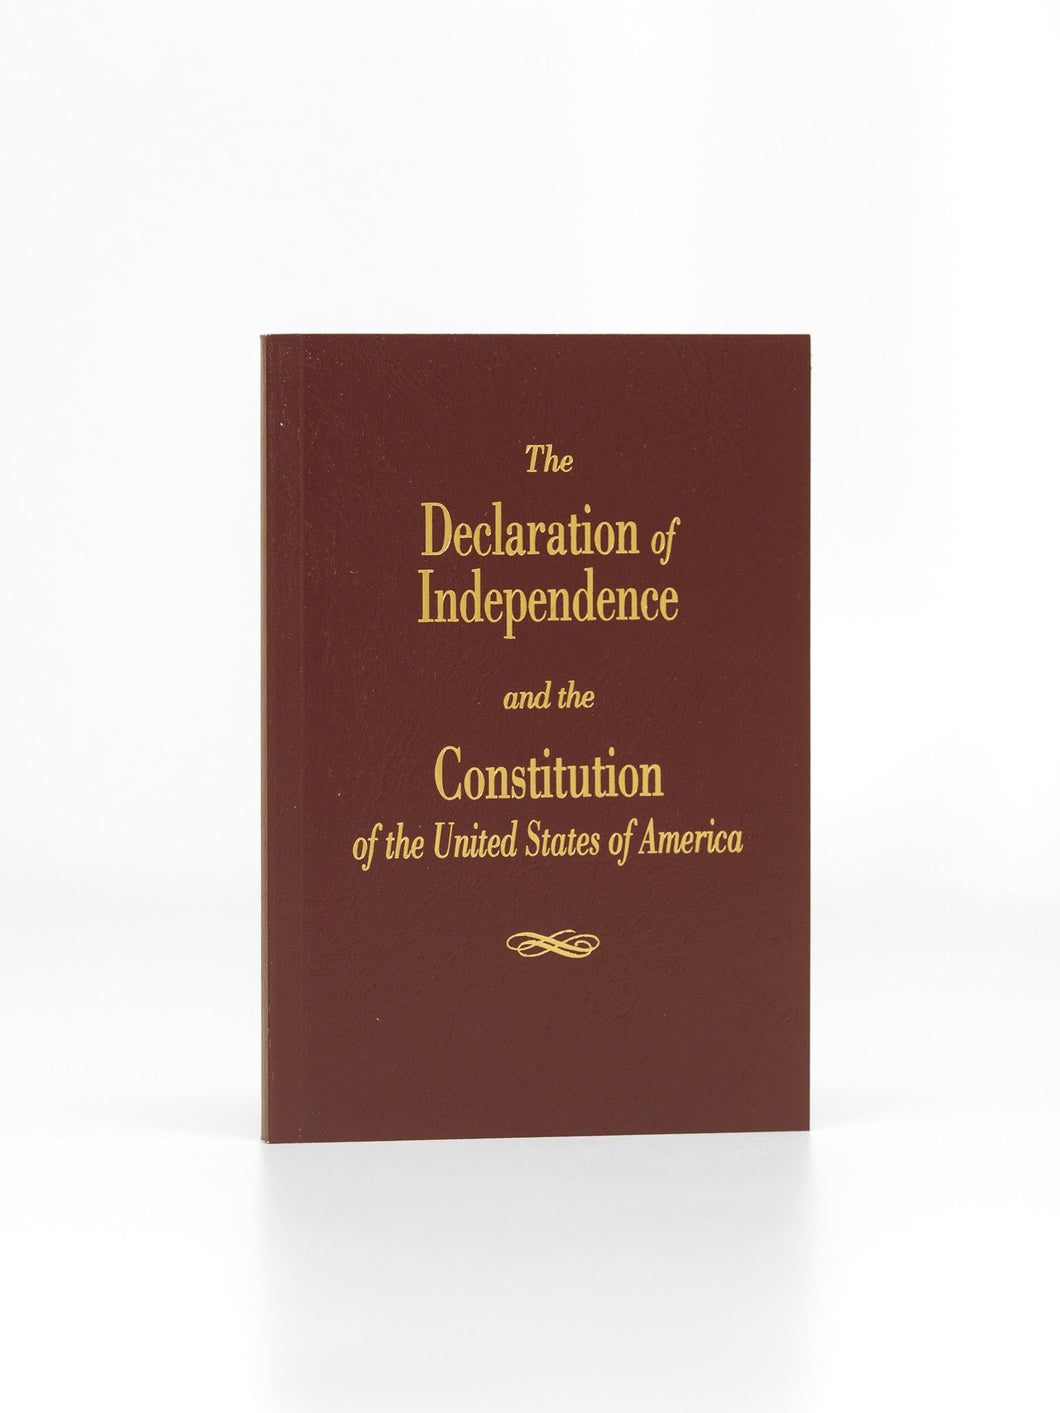 Pocket Constitution of the United States of America - Cato Edition